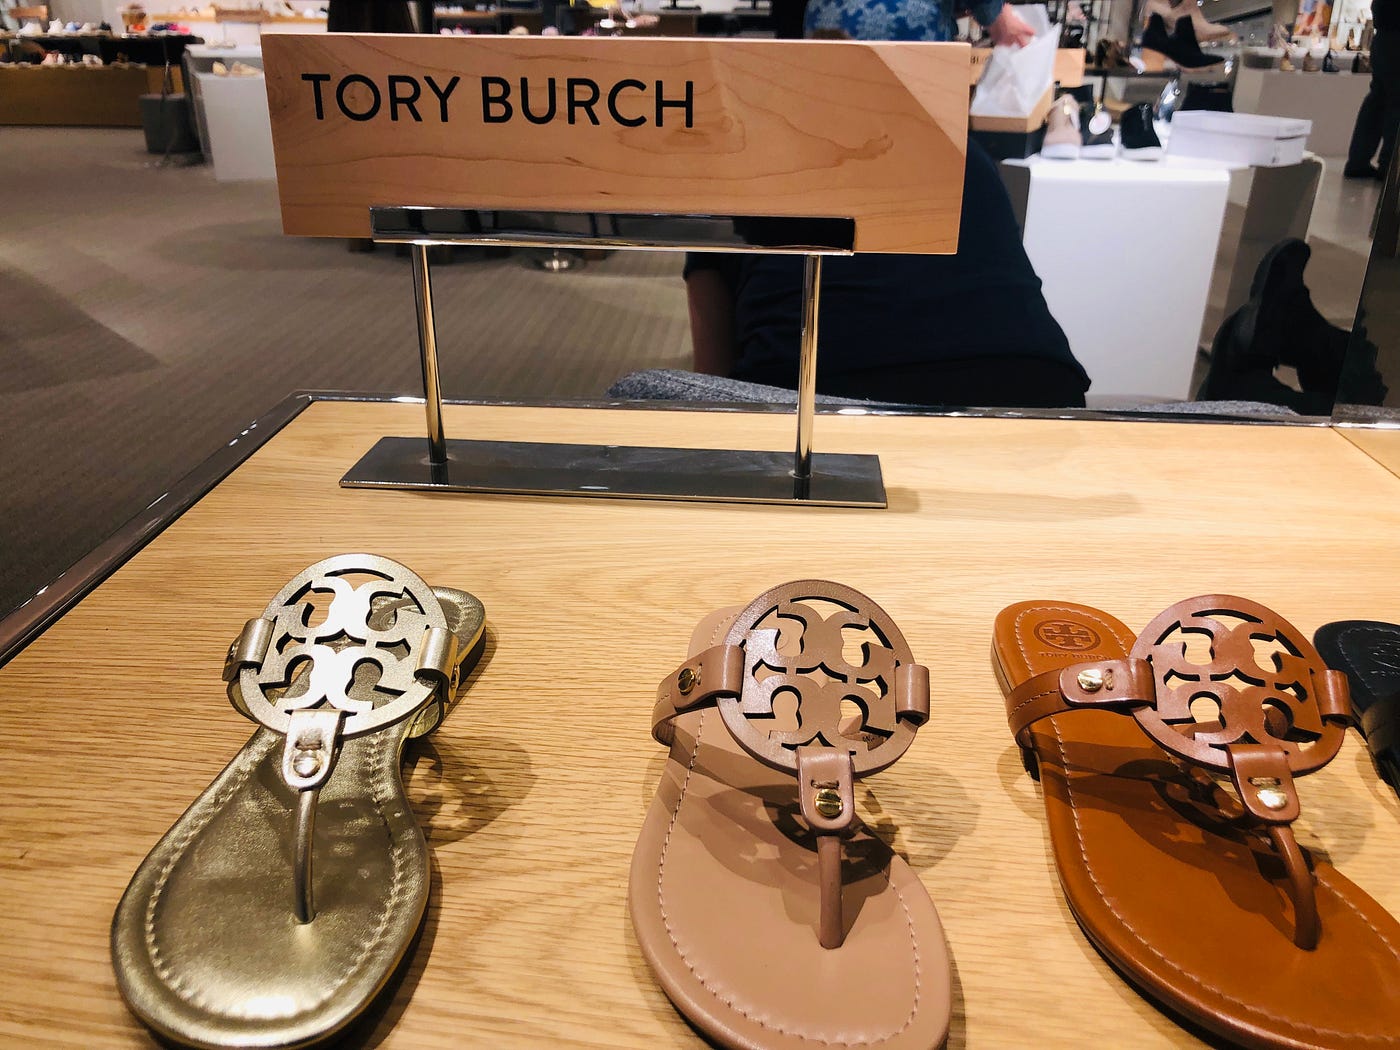 Tory Burch Sandals Are Worth the Price